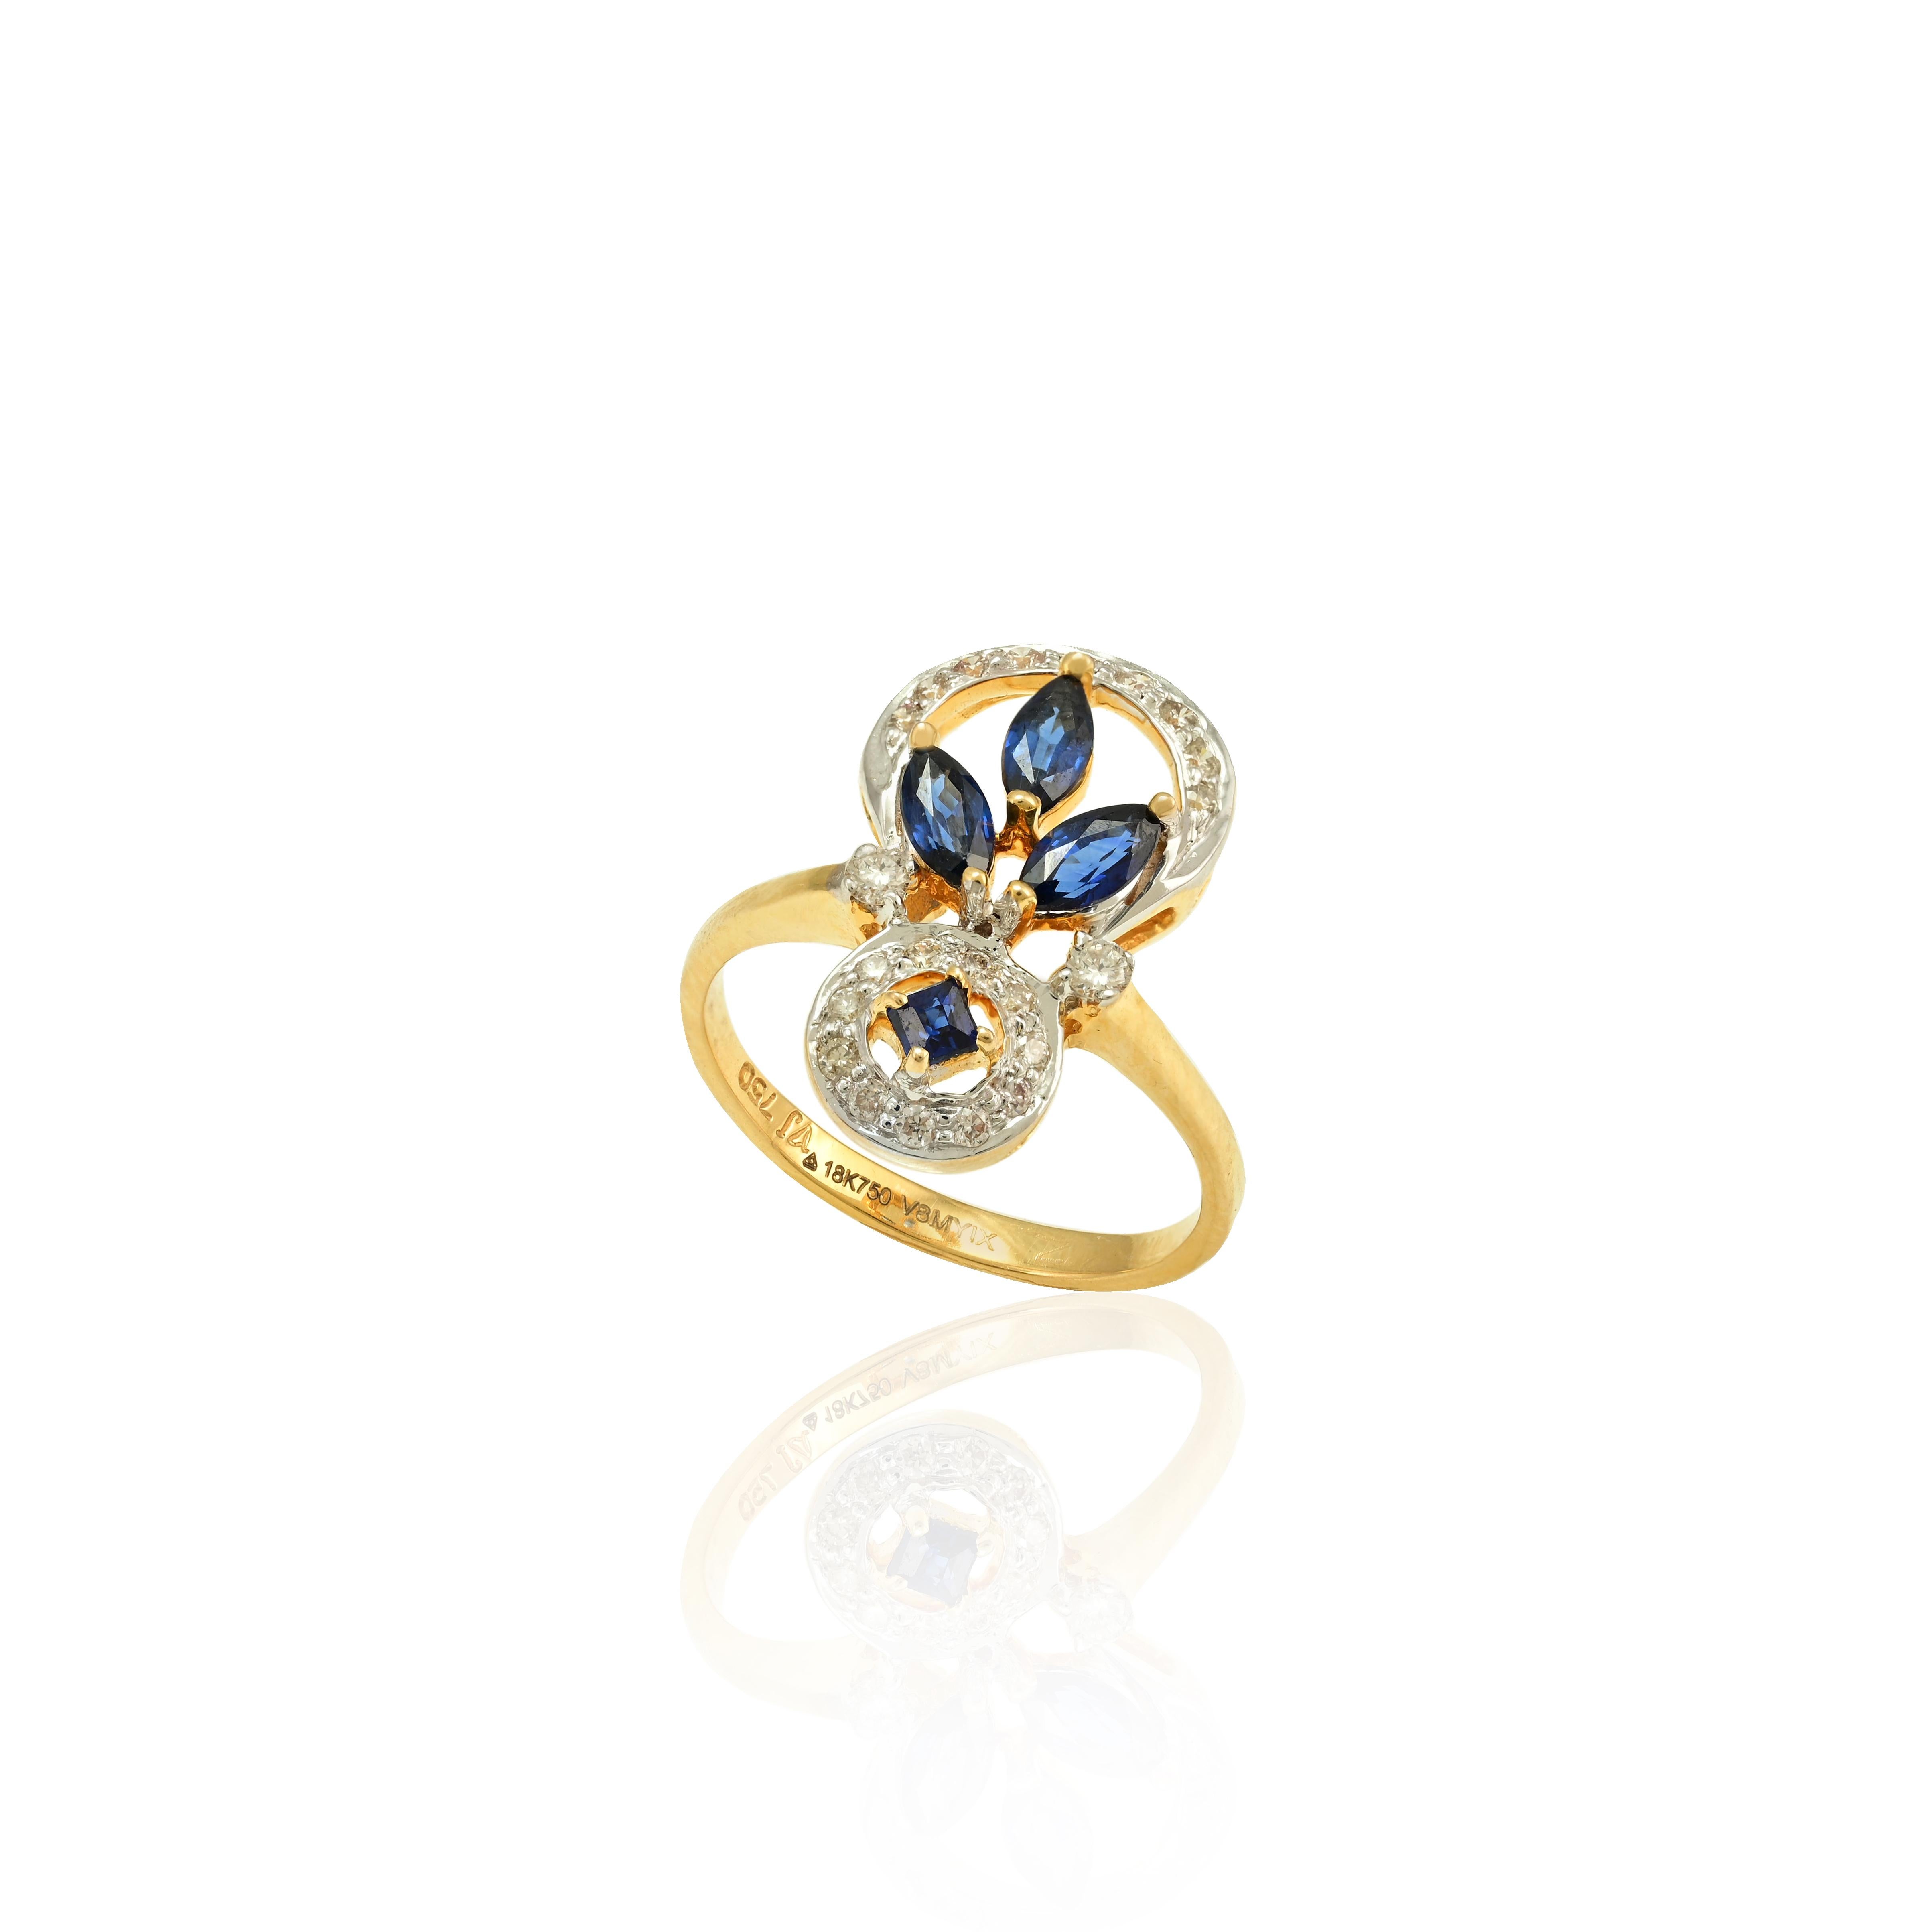 For Sale:  18k Solid Yellow Gold Contemporary Diamond and Blue Sapphire Statement Ring 5